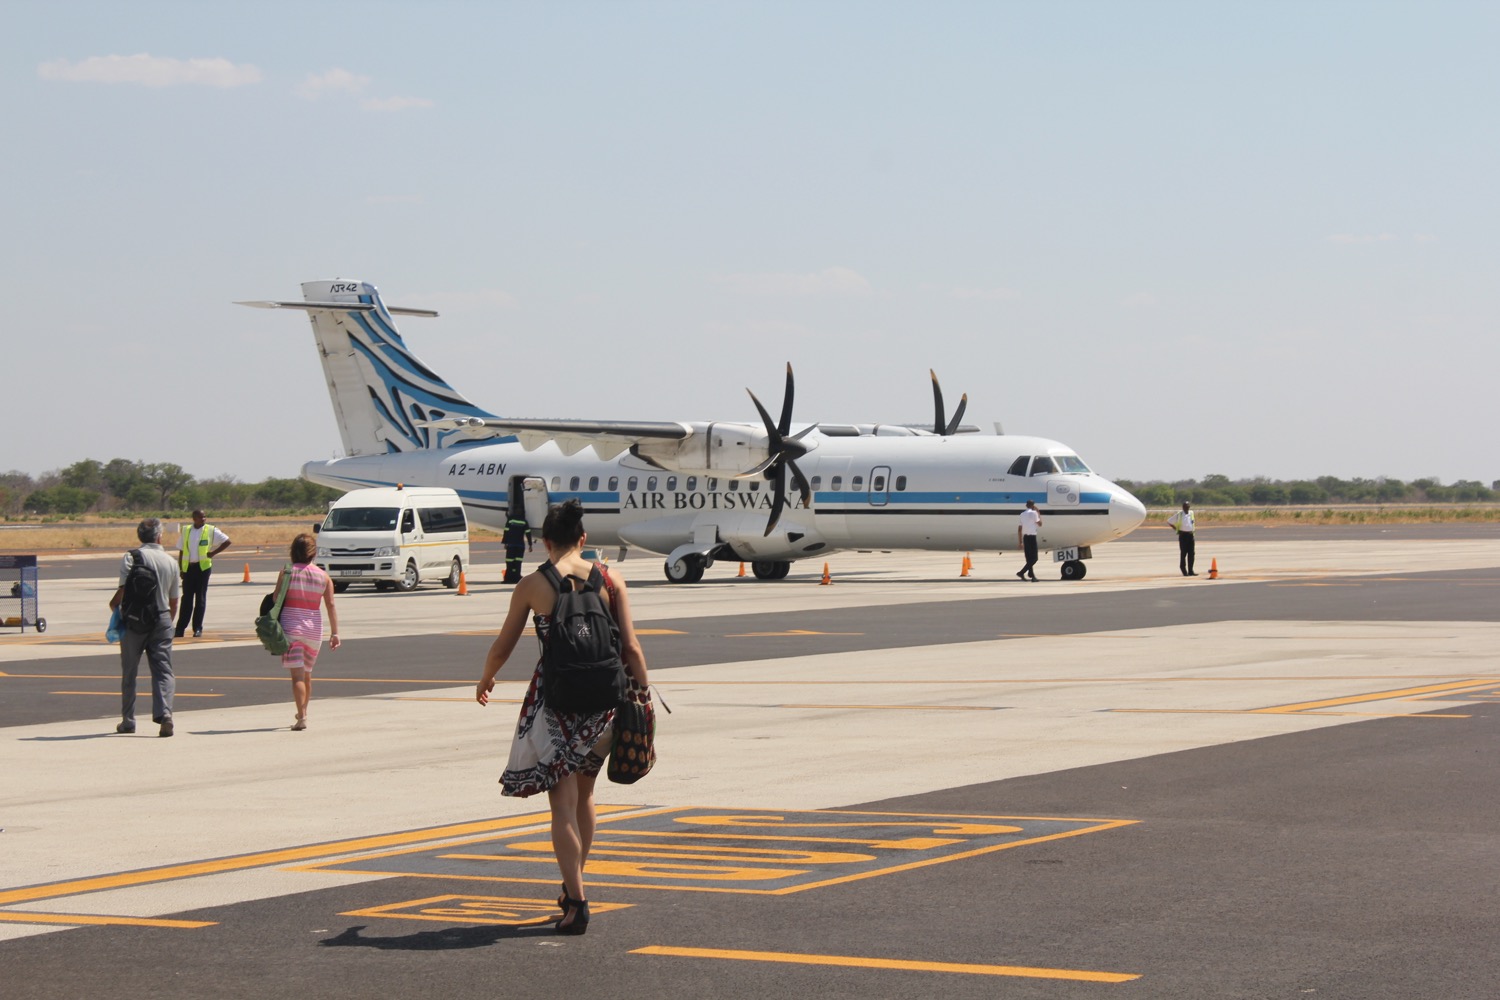 South African Airlink - 20